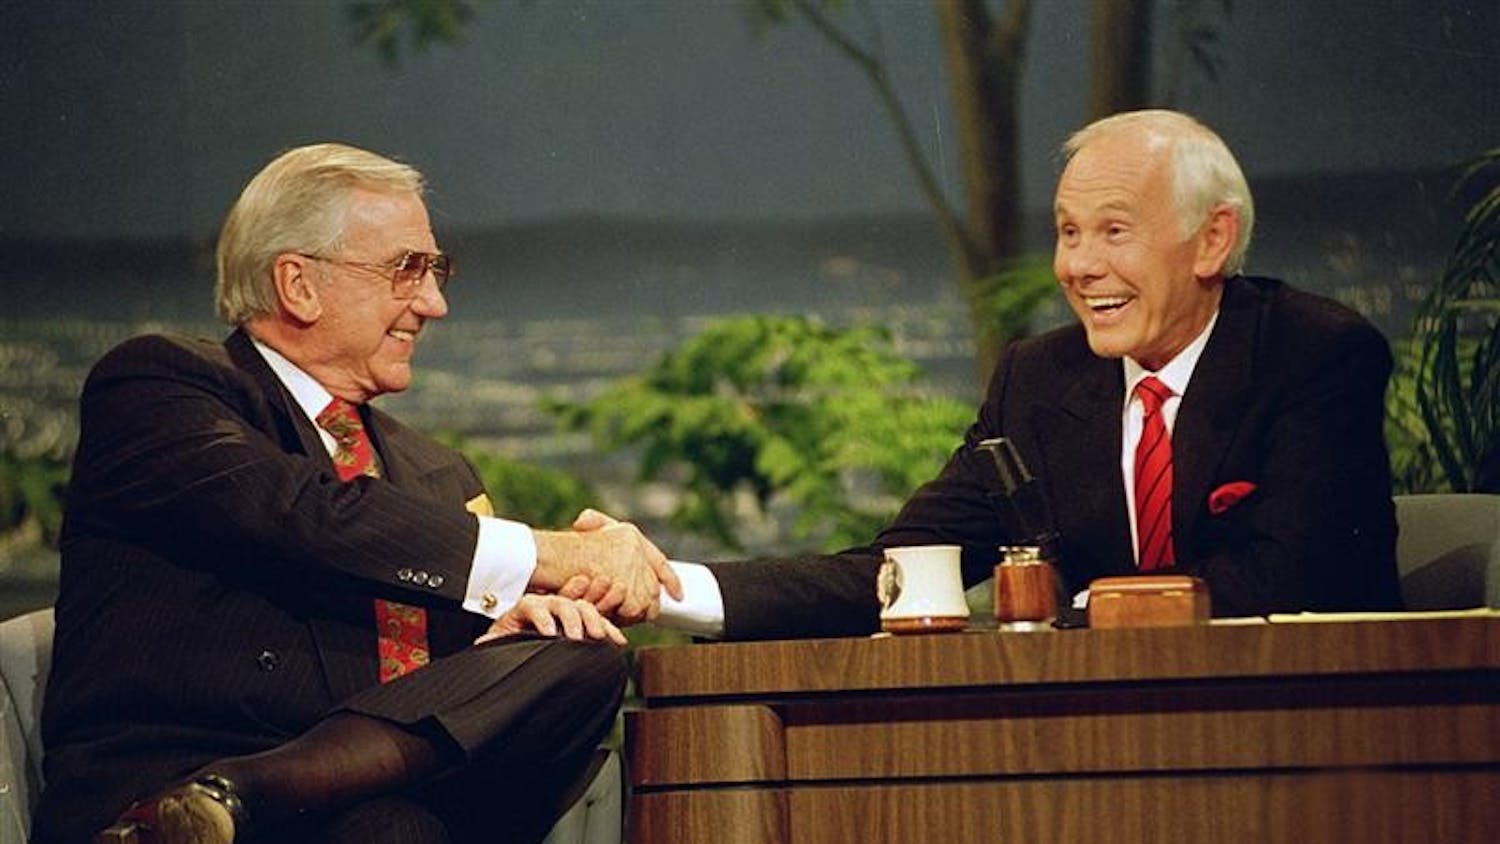 FILE - In this May 22, 1992 file photo, Ed McMahon, left, shakes hands with talk show host Johnny Carson, during the final taping of the "Tonight Show" in Burbank, Calif. McMahon died at a Los Angeles hospital, according to his publicist. He was 86. 